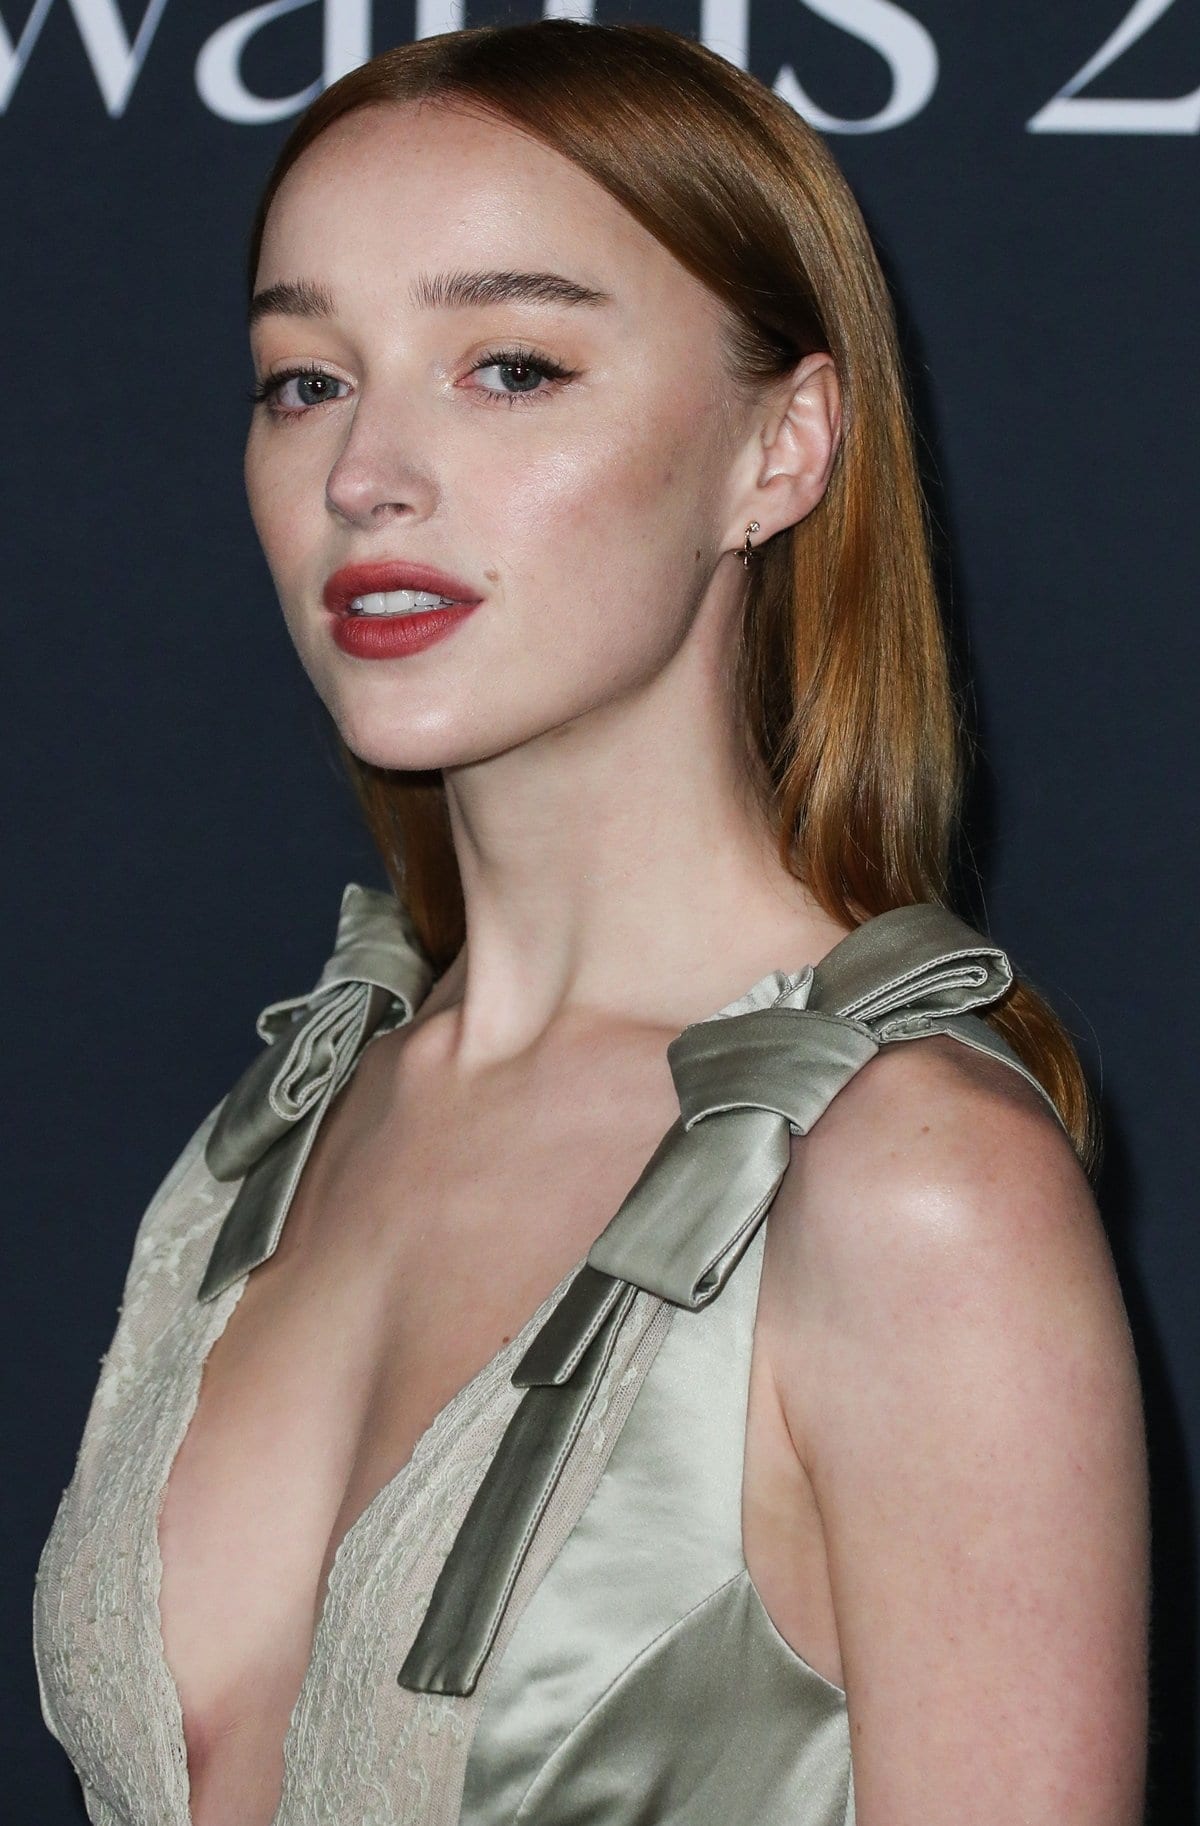 Actress Phoebe Dynevor wearing a sexy Louis Vuitton dress arrives at the 6th Annual InStyle Awards 2021